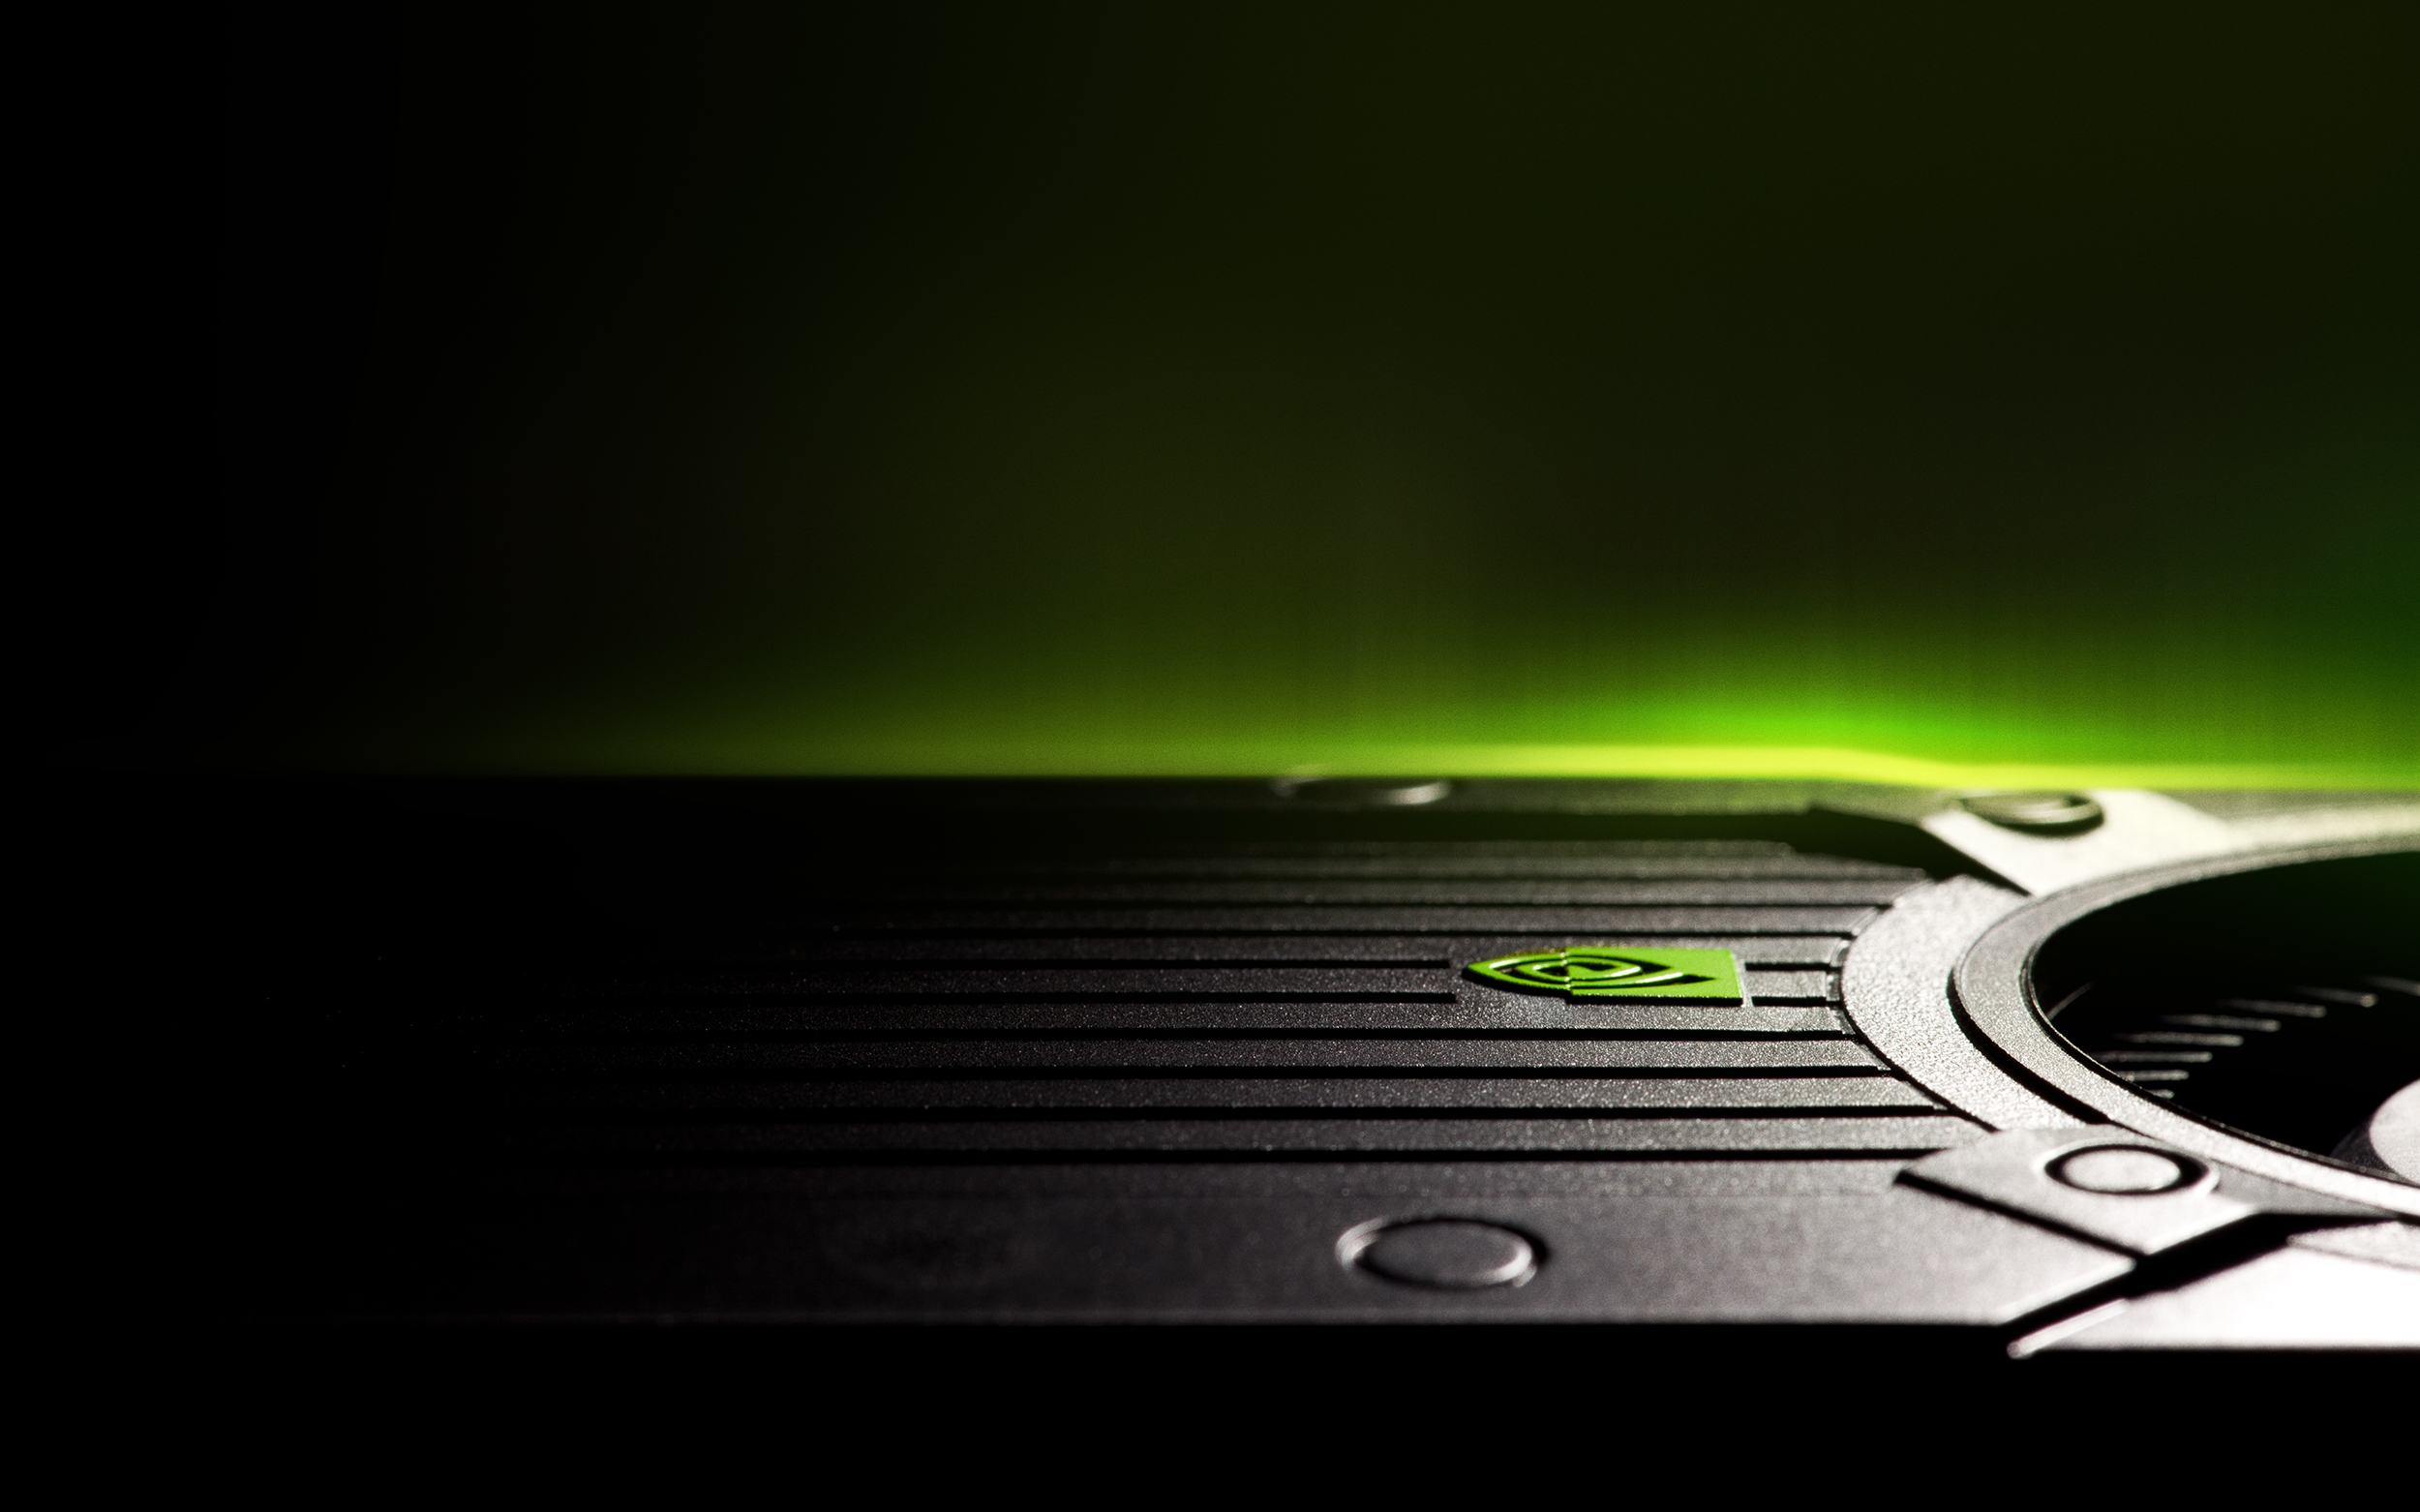 Free Download Nvidia Geforce Gtx 650 Ti Boost Wallpaper Hd Wallpapers 2500x1562 For Your Desktop Mobile Tablet Explore 27 T I Wallpapers T I Wallpapers Ti Hustle Gang Wallpaper